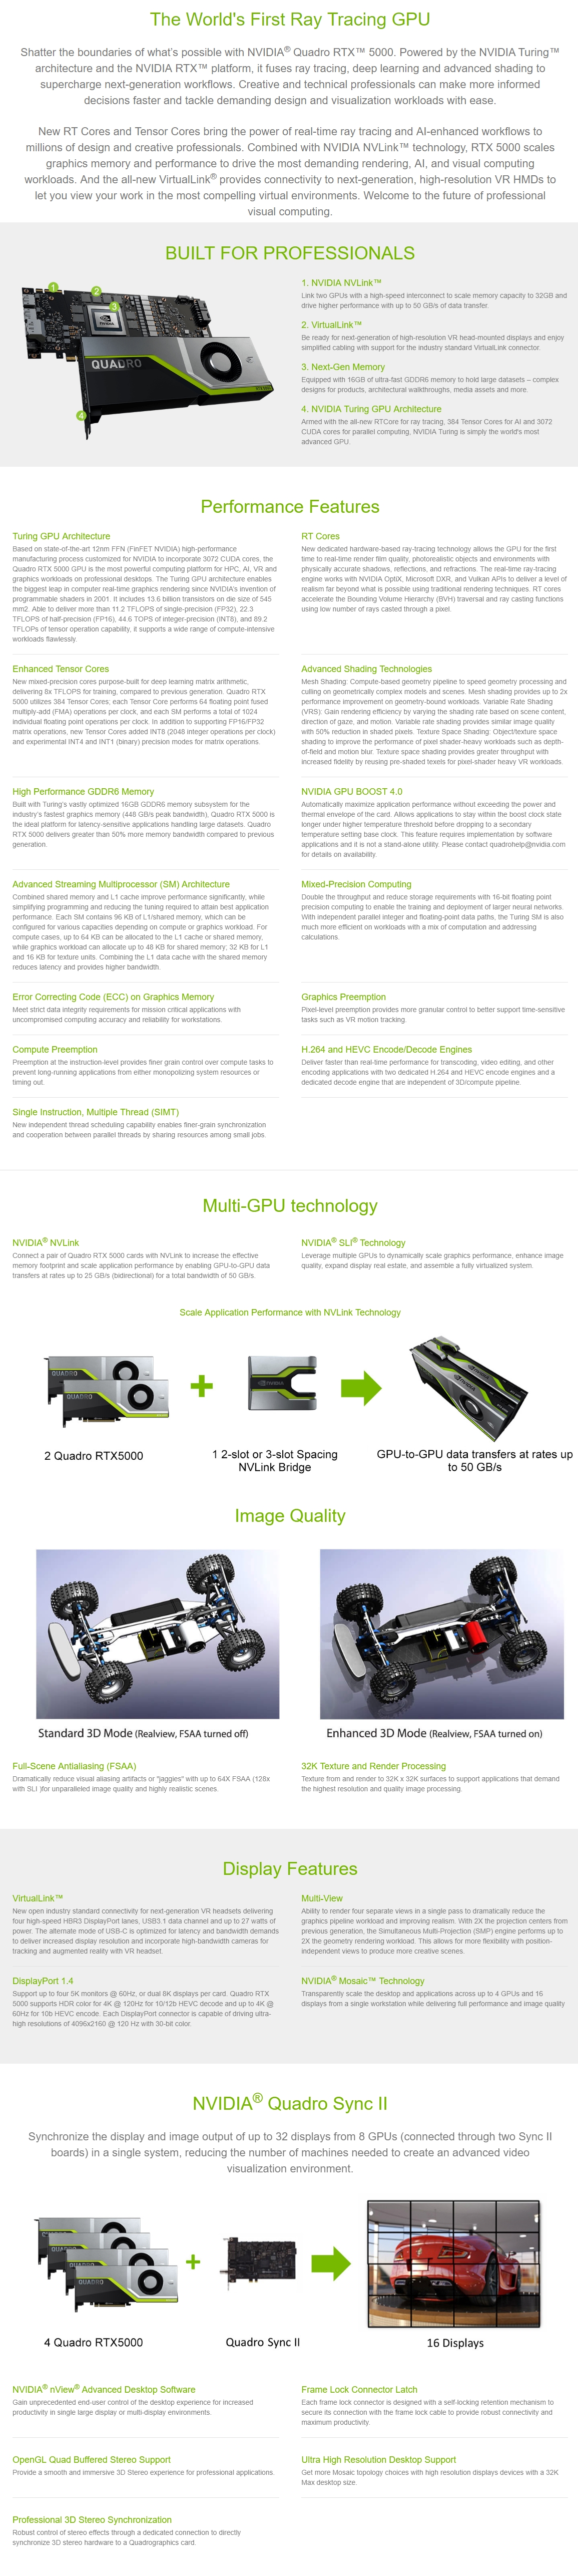 A large marketing image providing additional information about the product Leadtek Quadro RTX 5000 384-Tensor Core 16GB GDDR6 - Additional alt info not provided